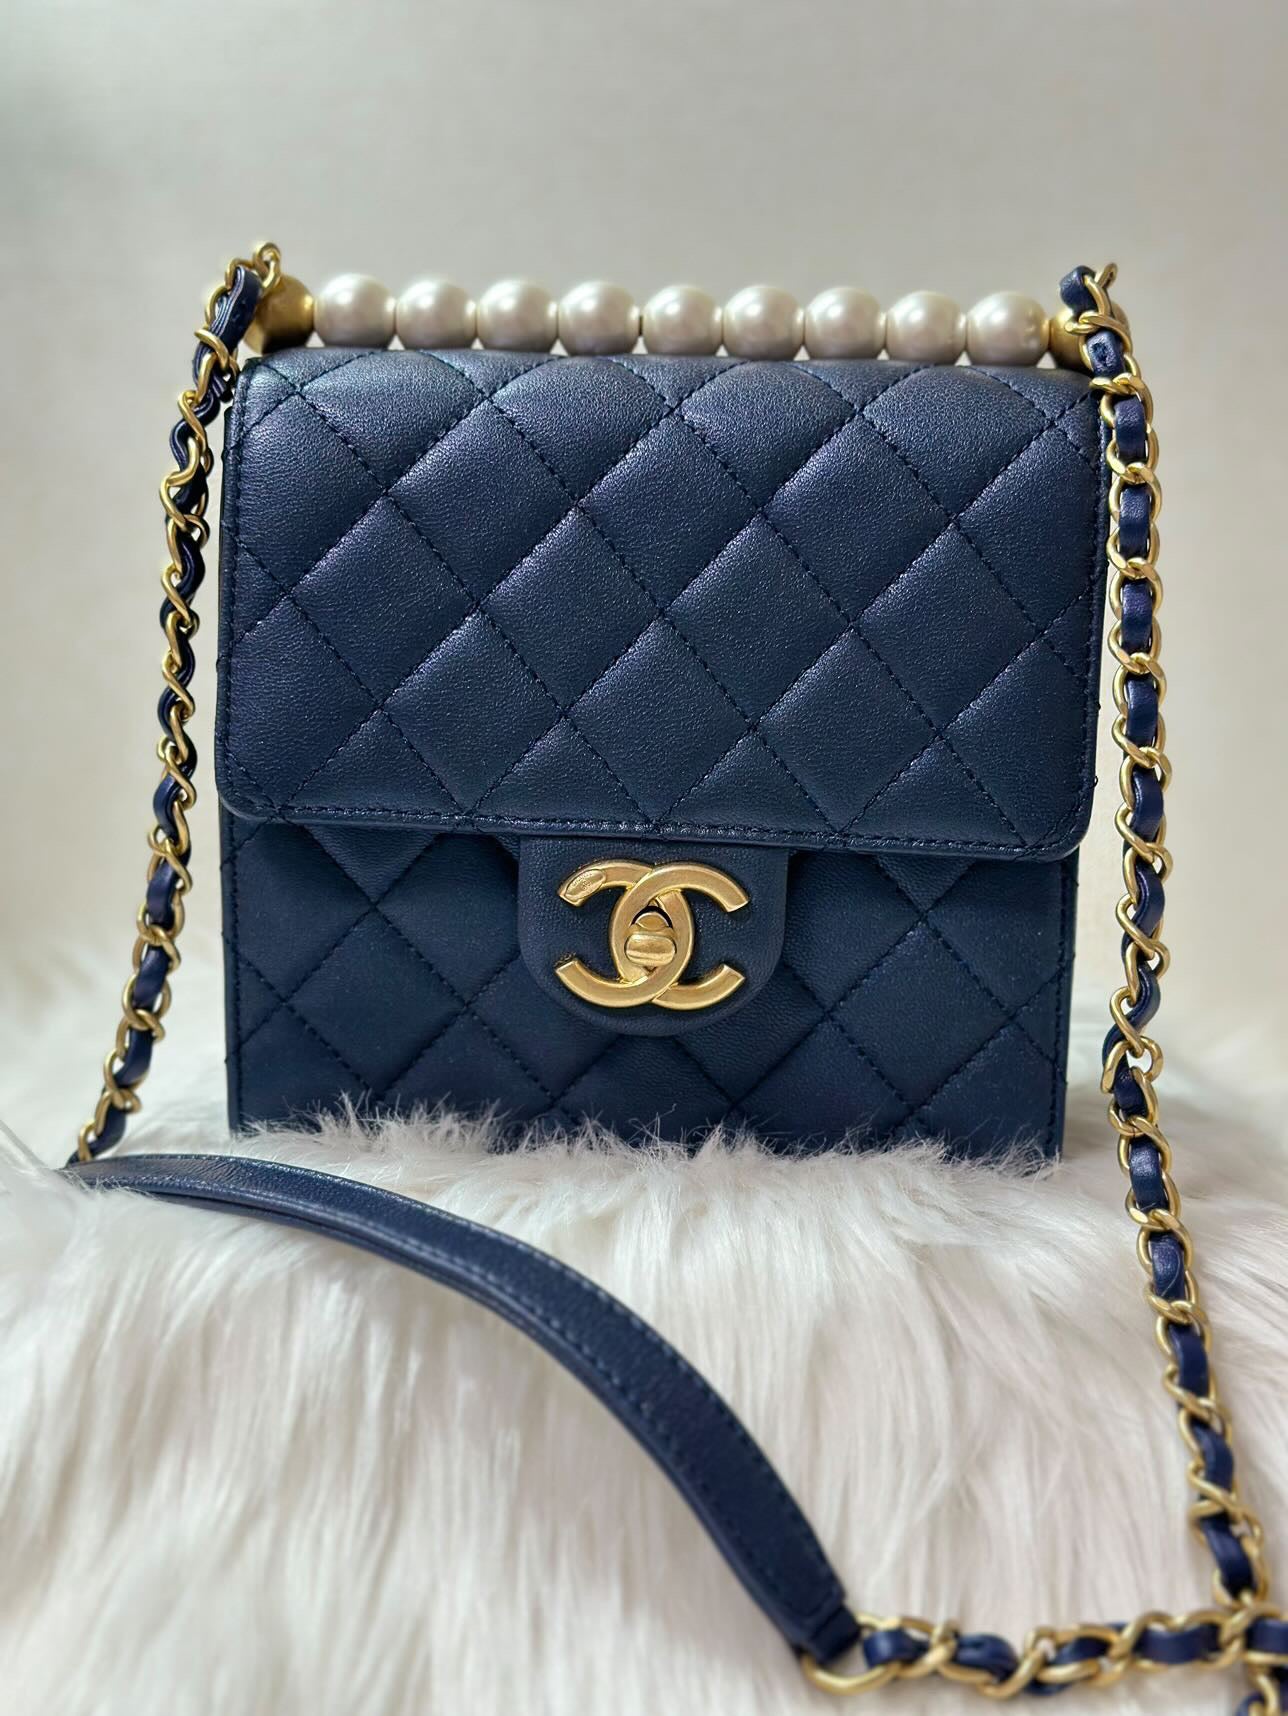 Chanel series 29 Iridescent Navy Lambskin GHW Chic Pearl Flap Bag